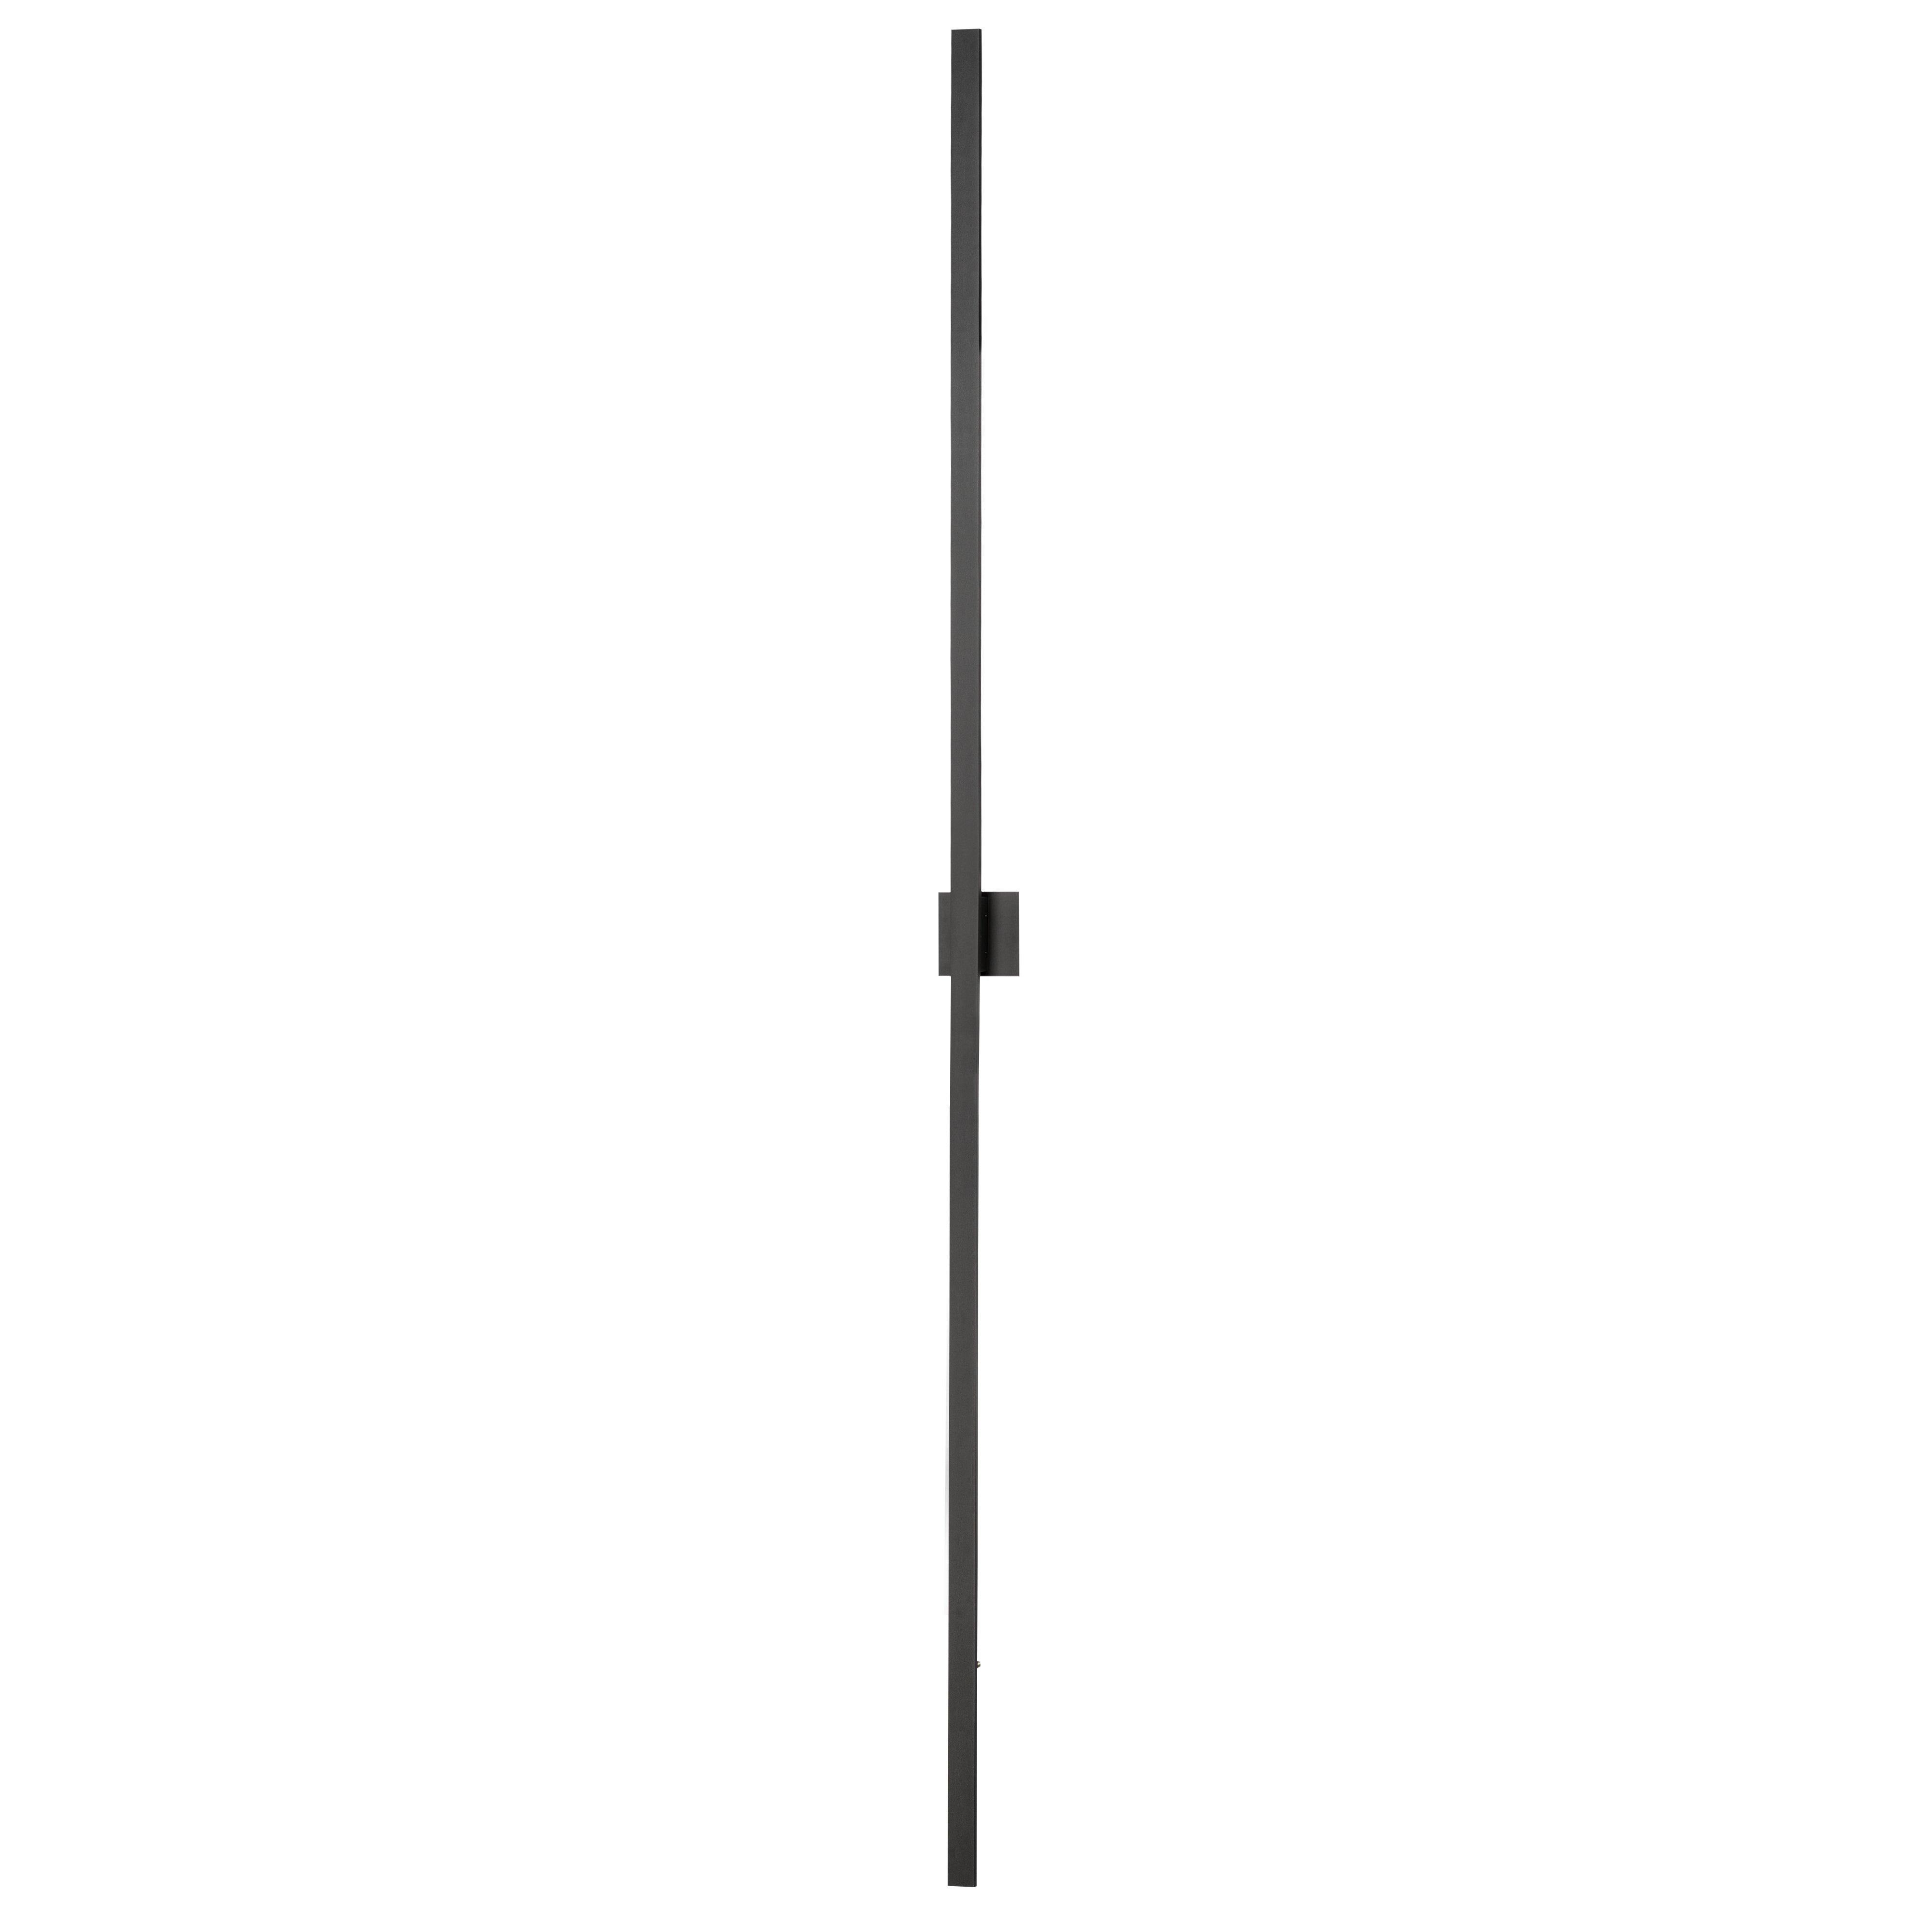 ALUMI LUX LINE Outdoor wall sconce Black INTEGRATED LED - E41348-BK | MAXIM/ET3